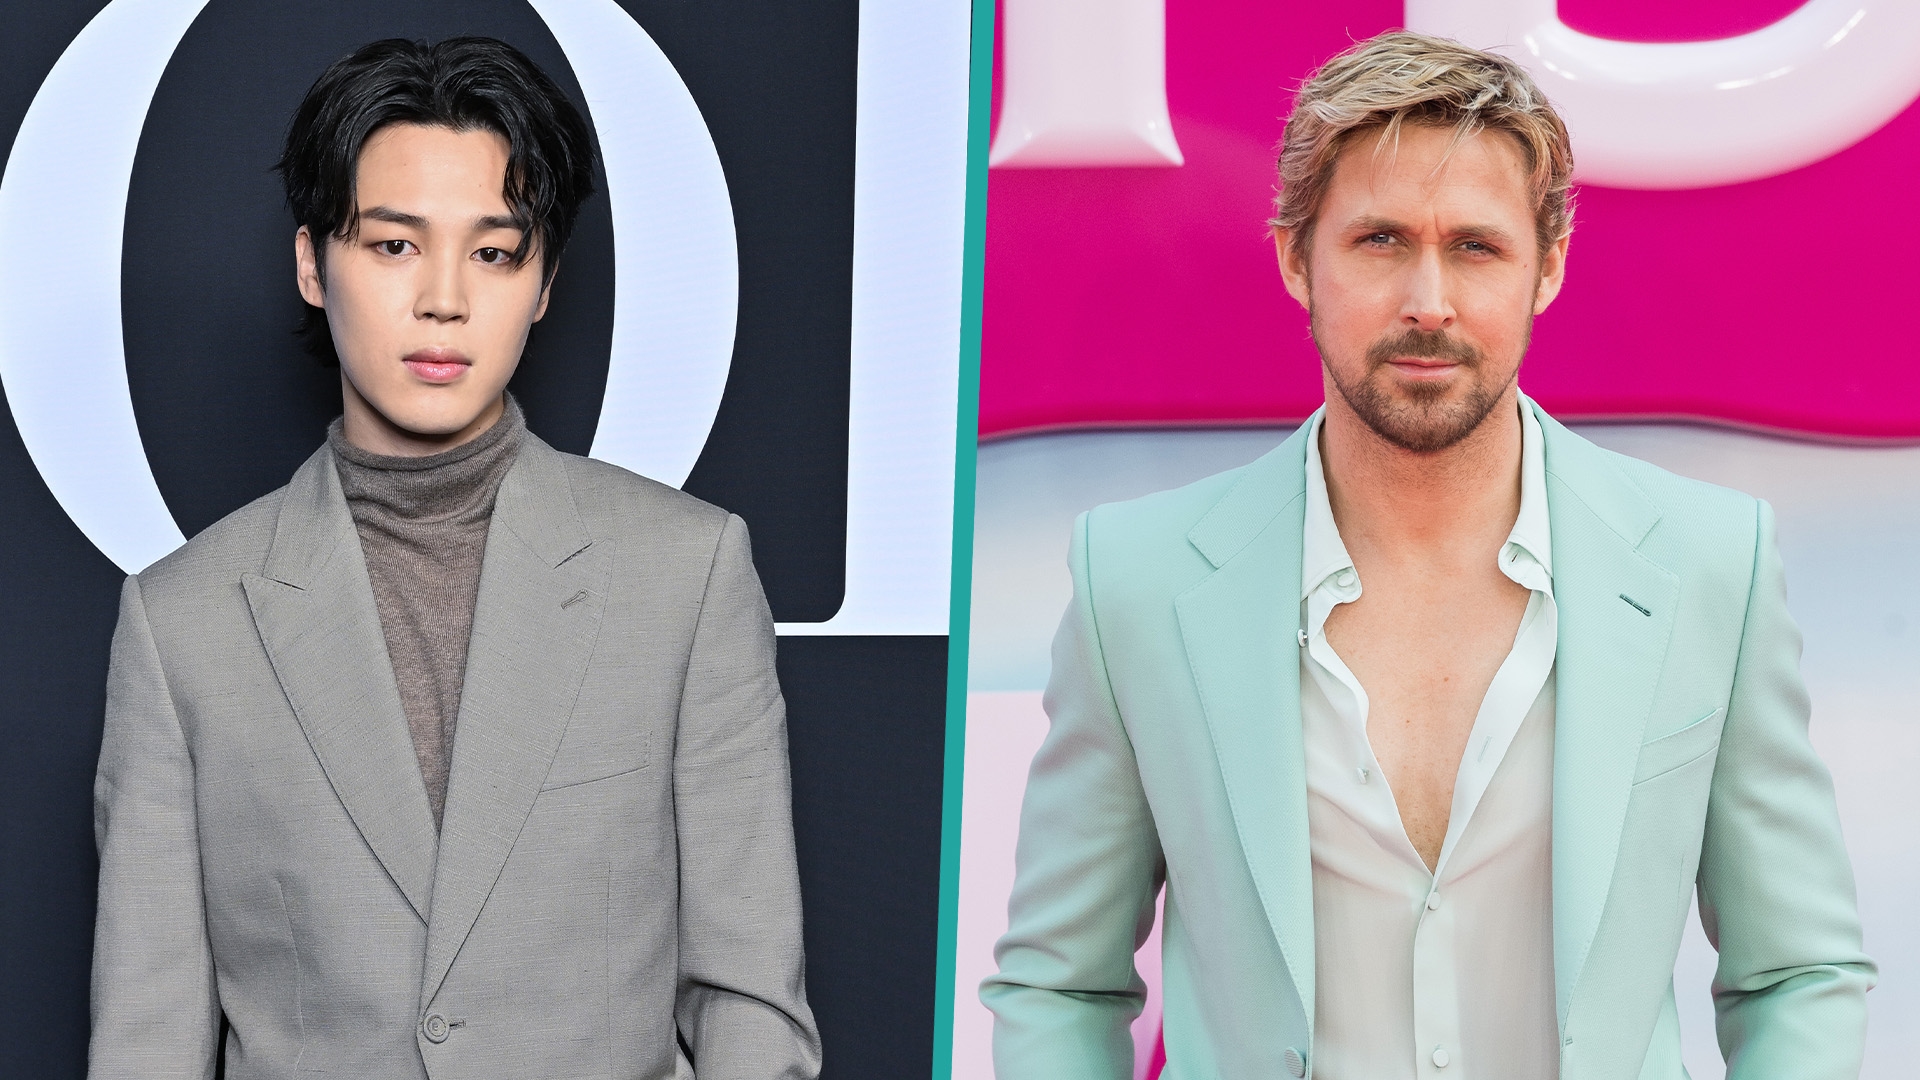 BTS Jimin: Ryan 'Ken' Gosling apologises to BTS Jimin for copying his  style, gifts him a guitar; ARMY goes berserk - The Economic Times